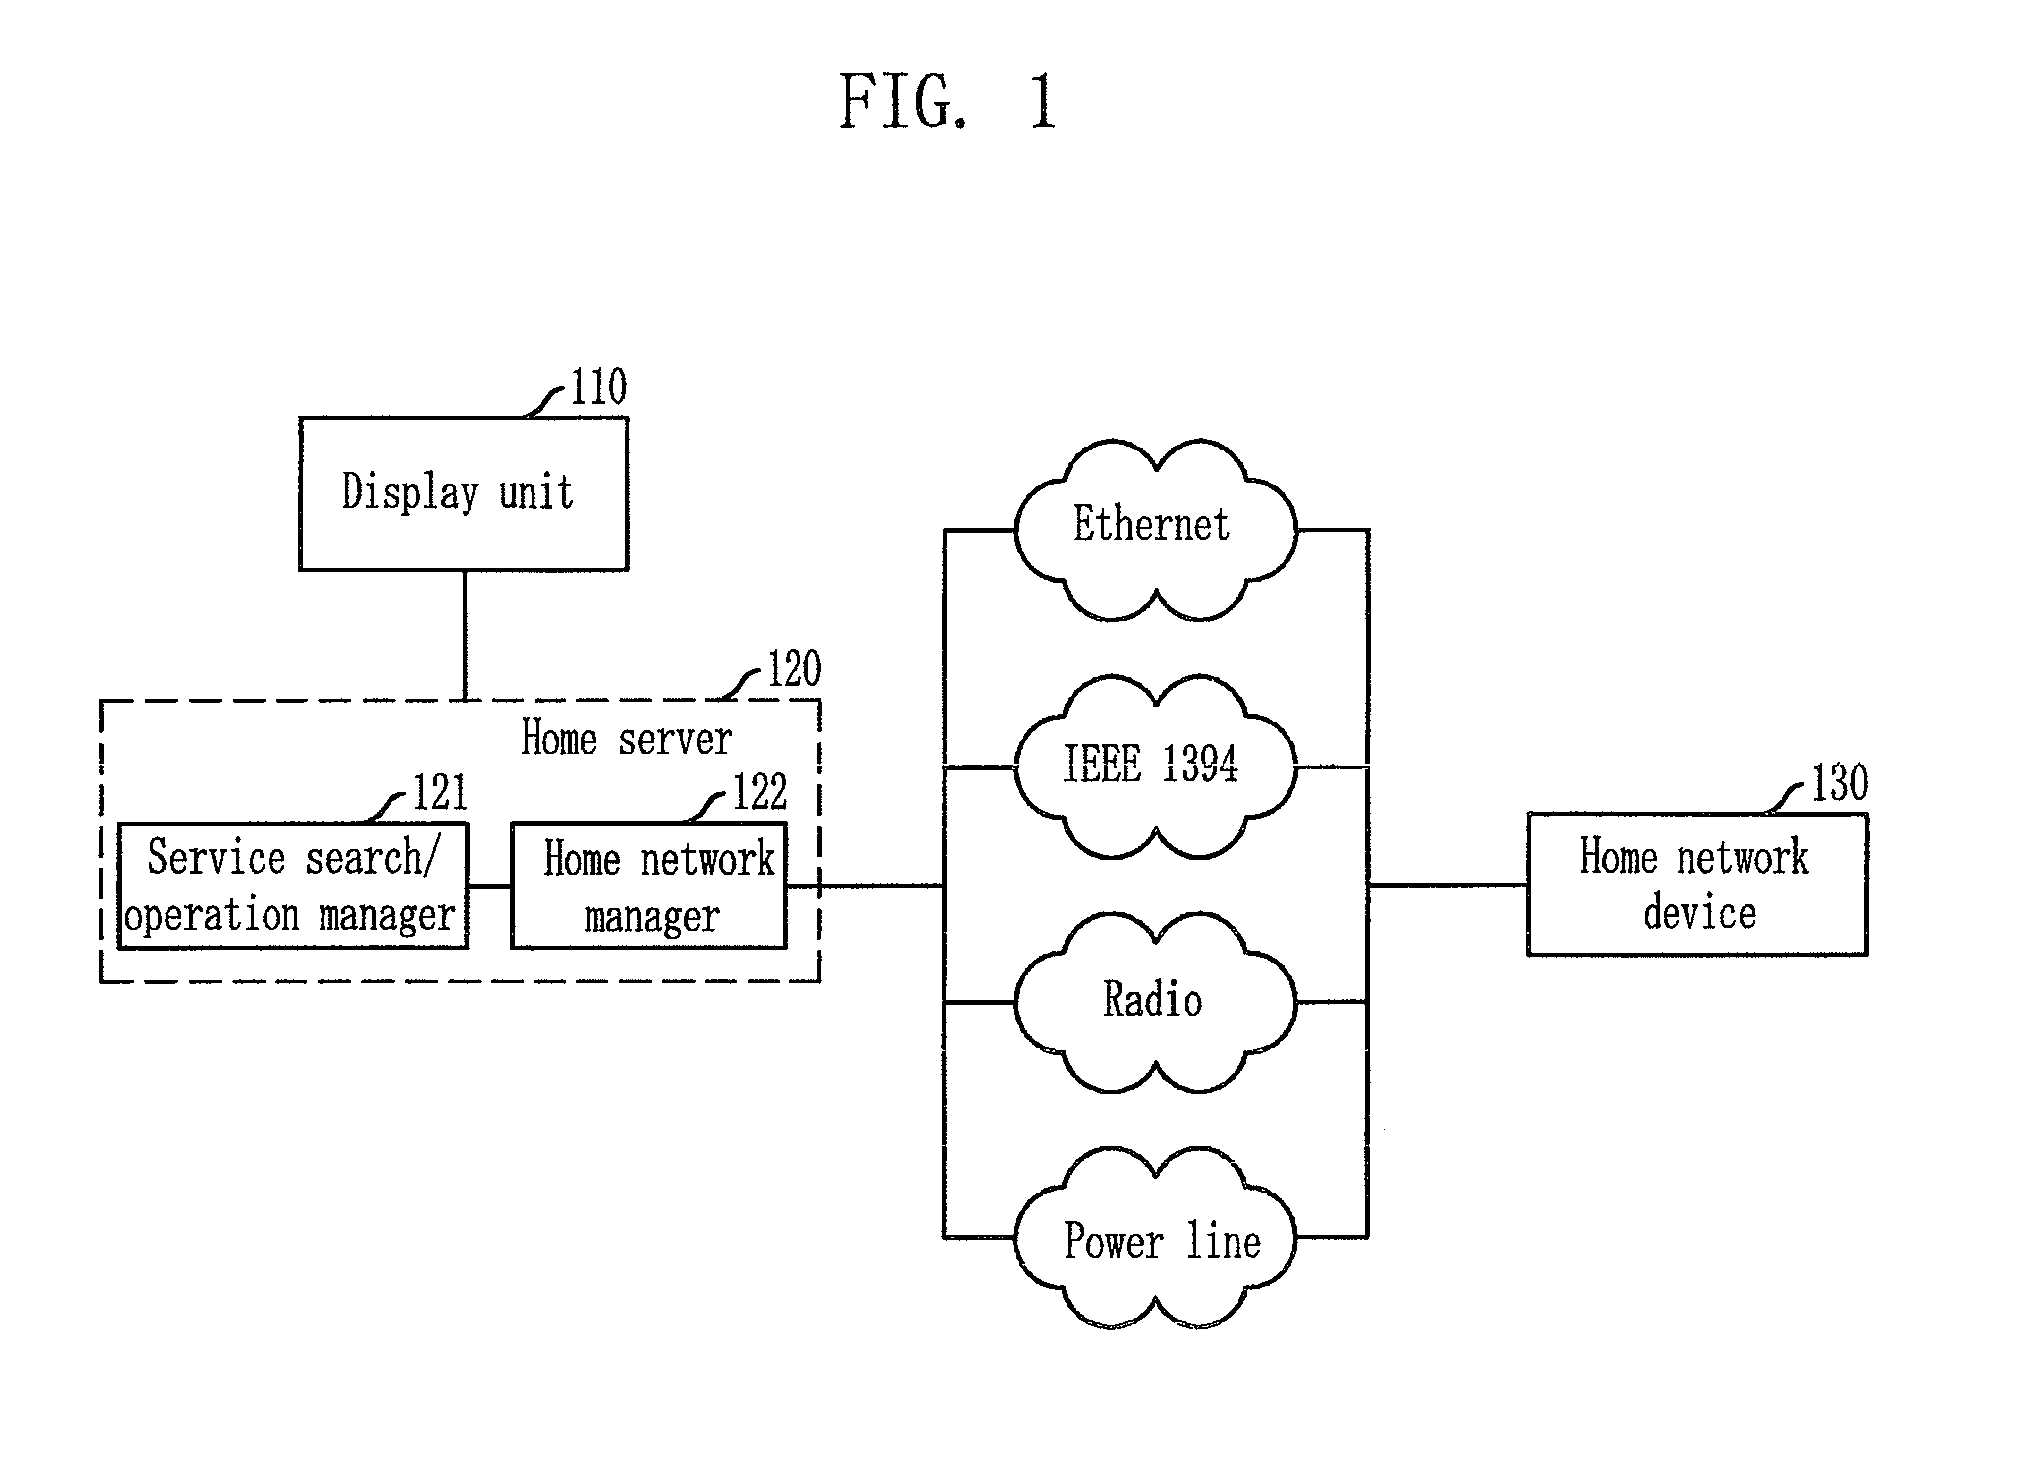 Apparatus and method for searching/managing home network service based on home network condition